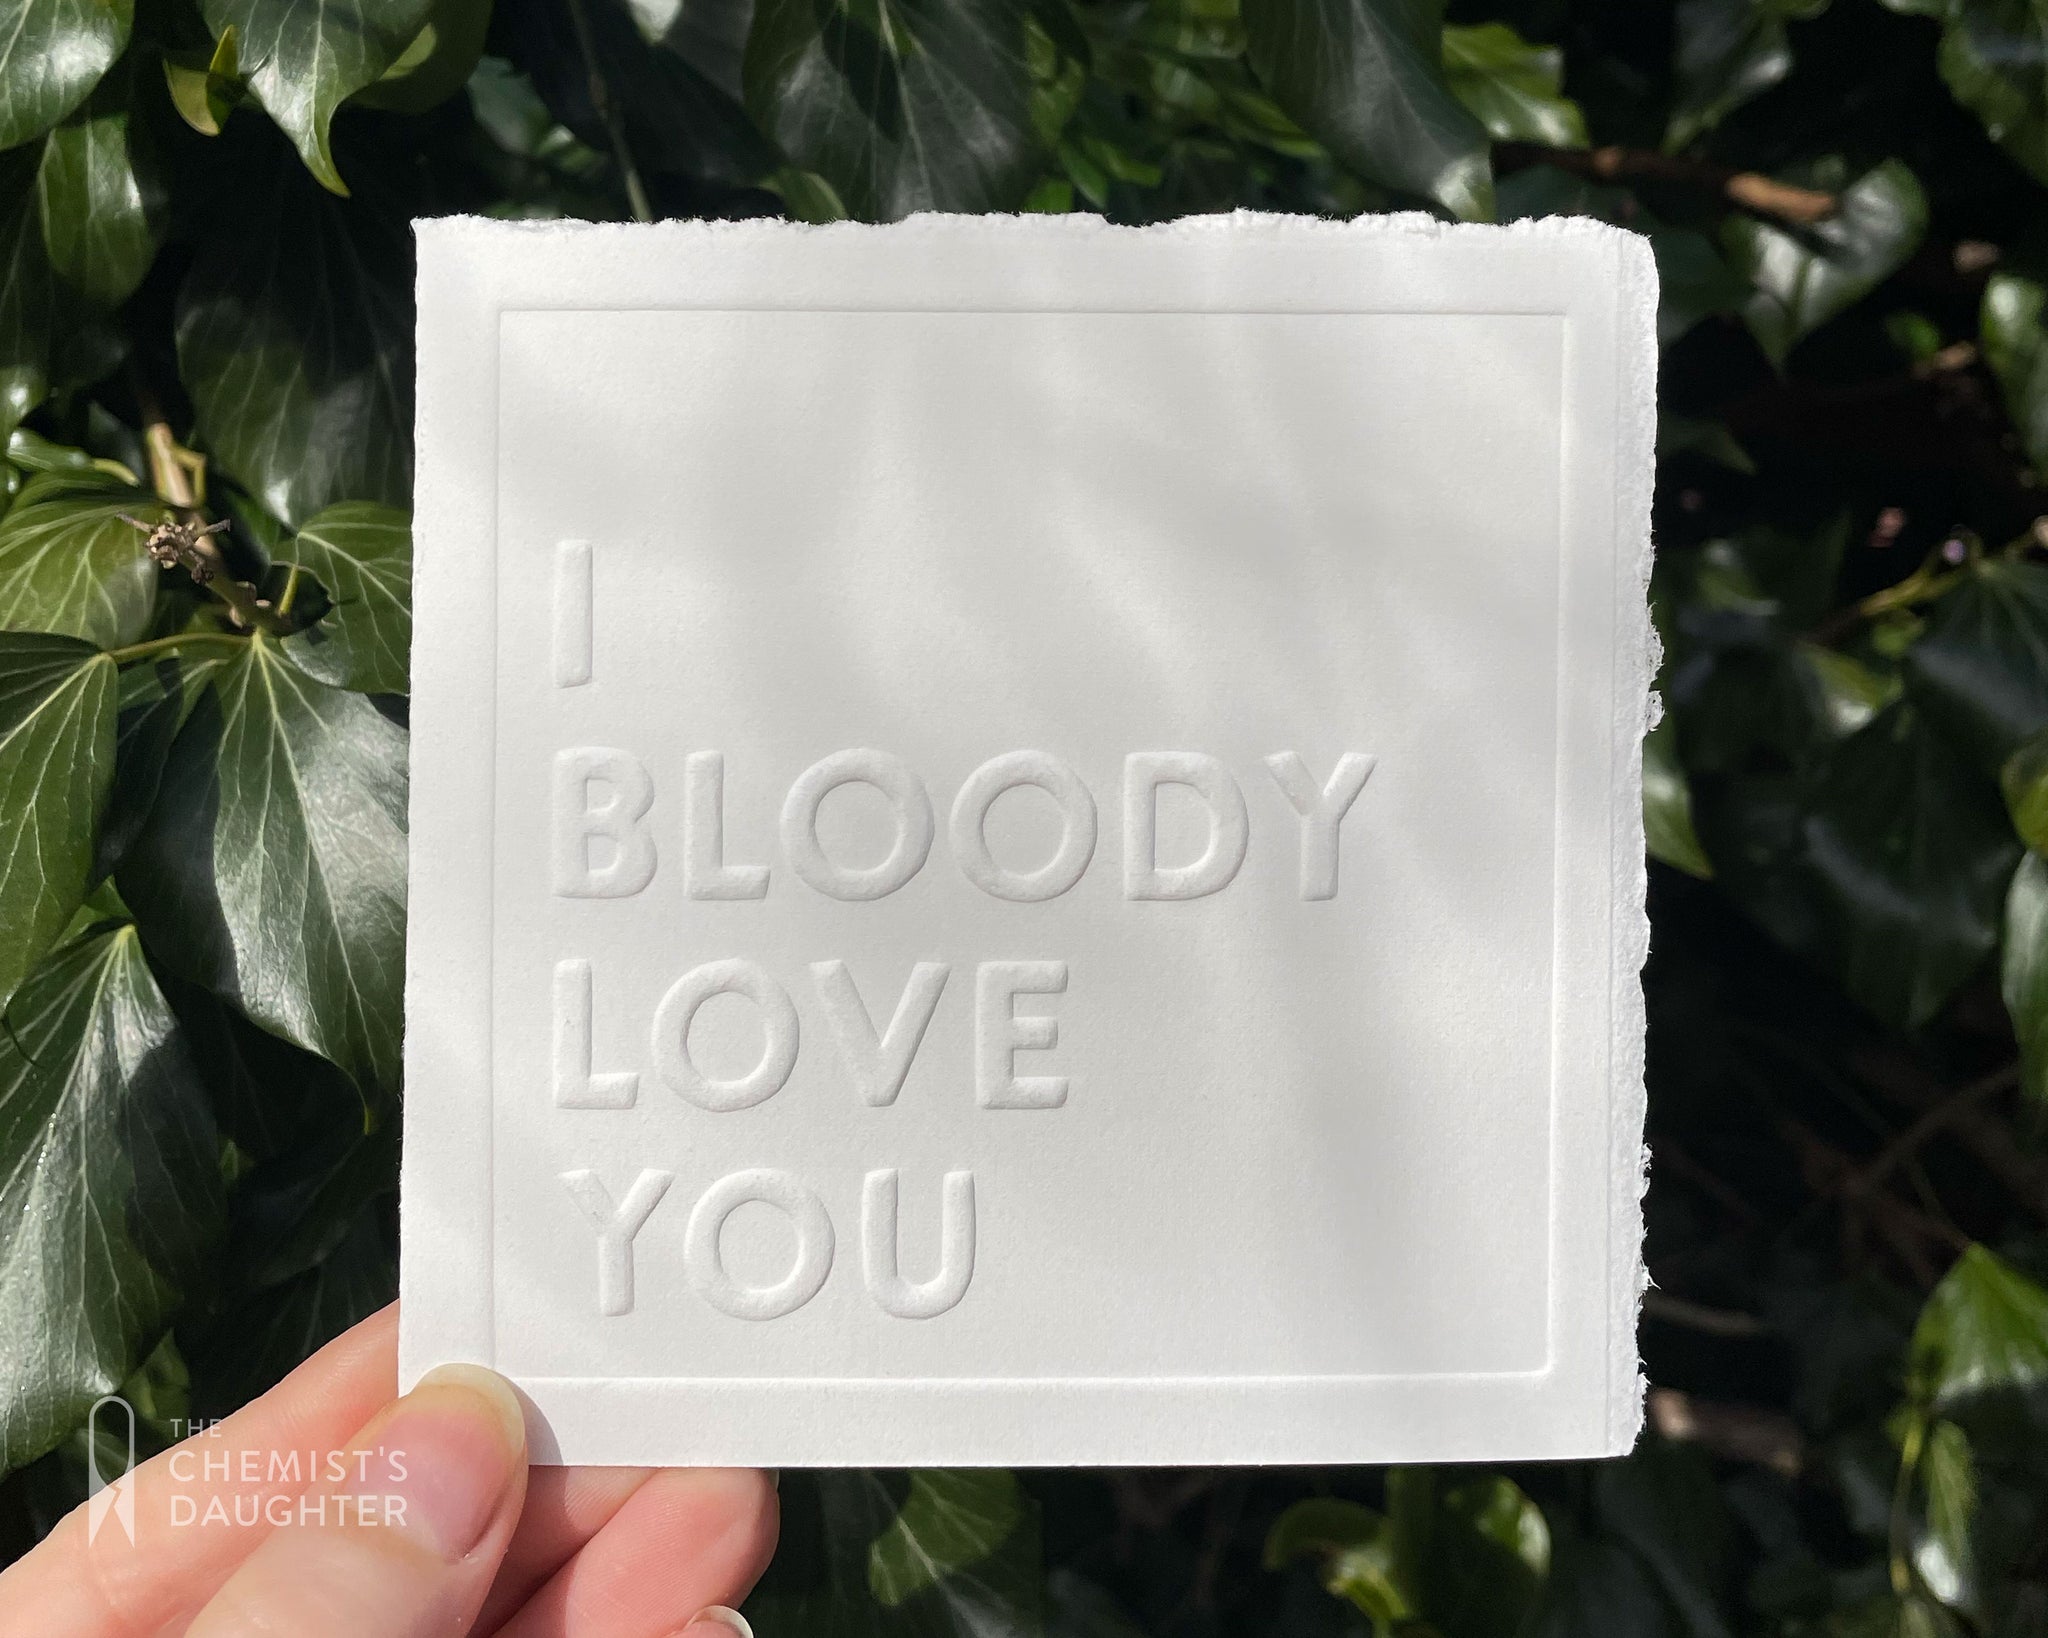 Card | I Bloody Love You